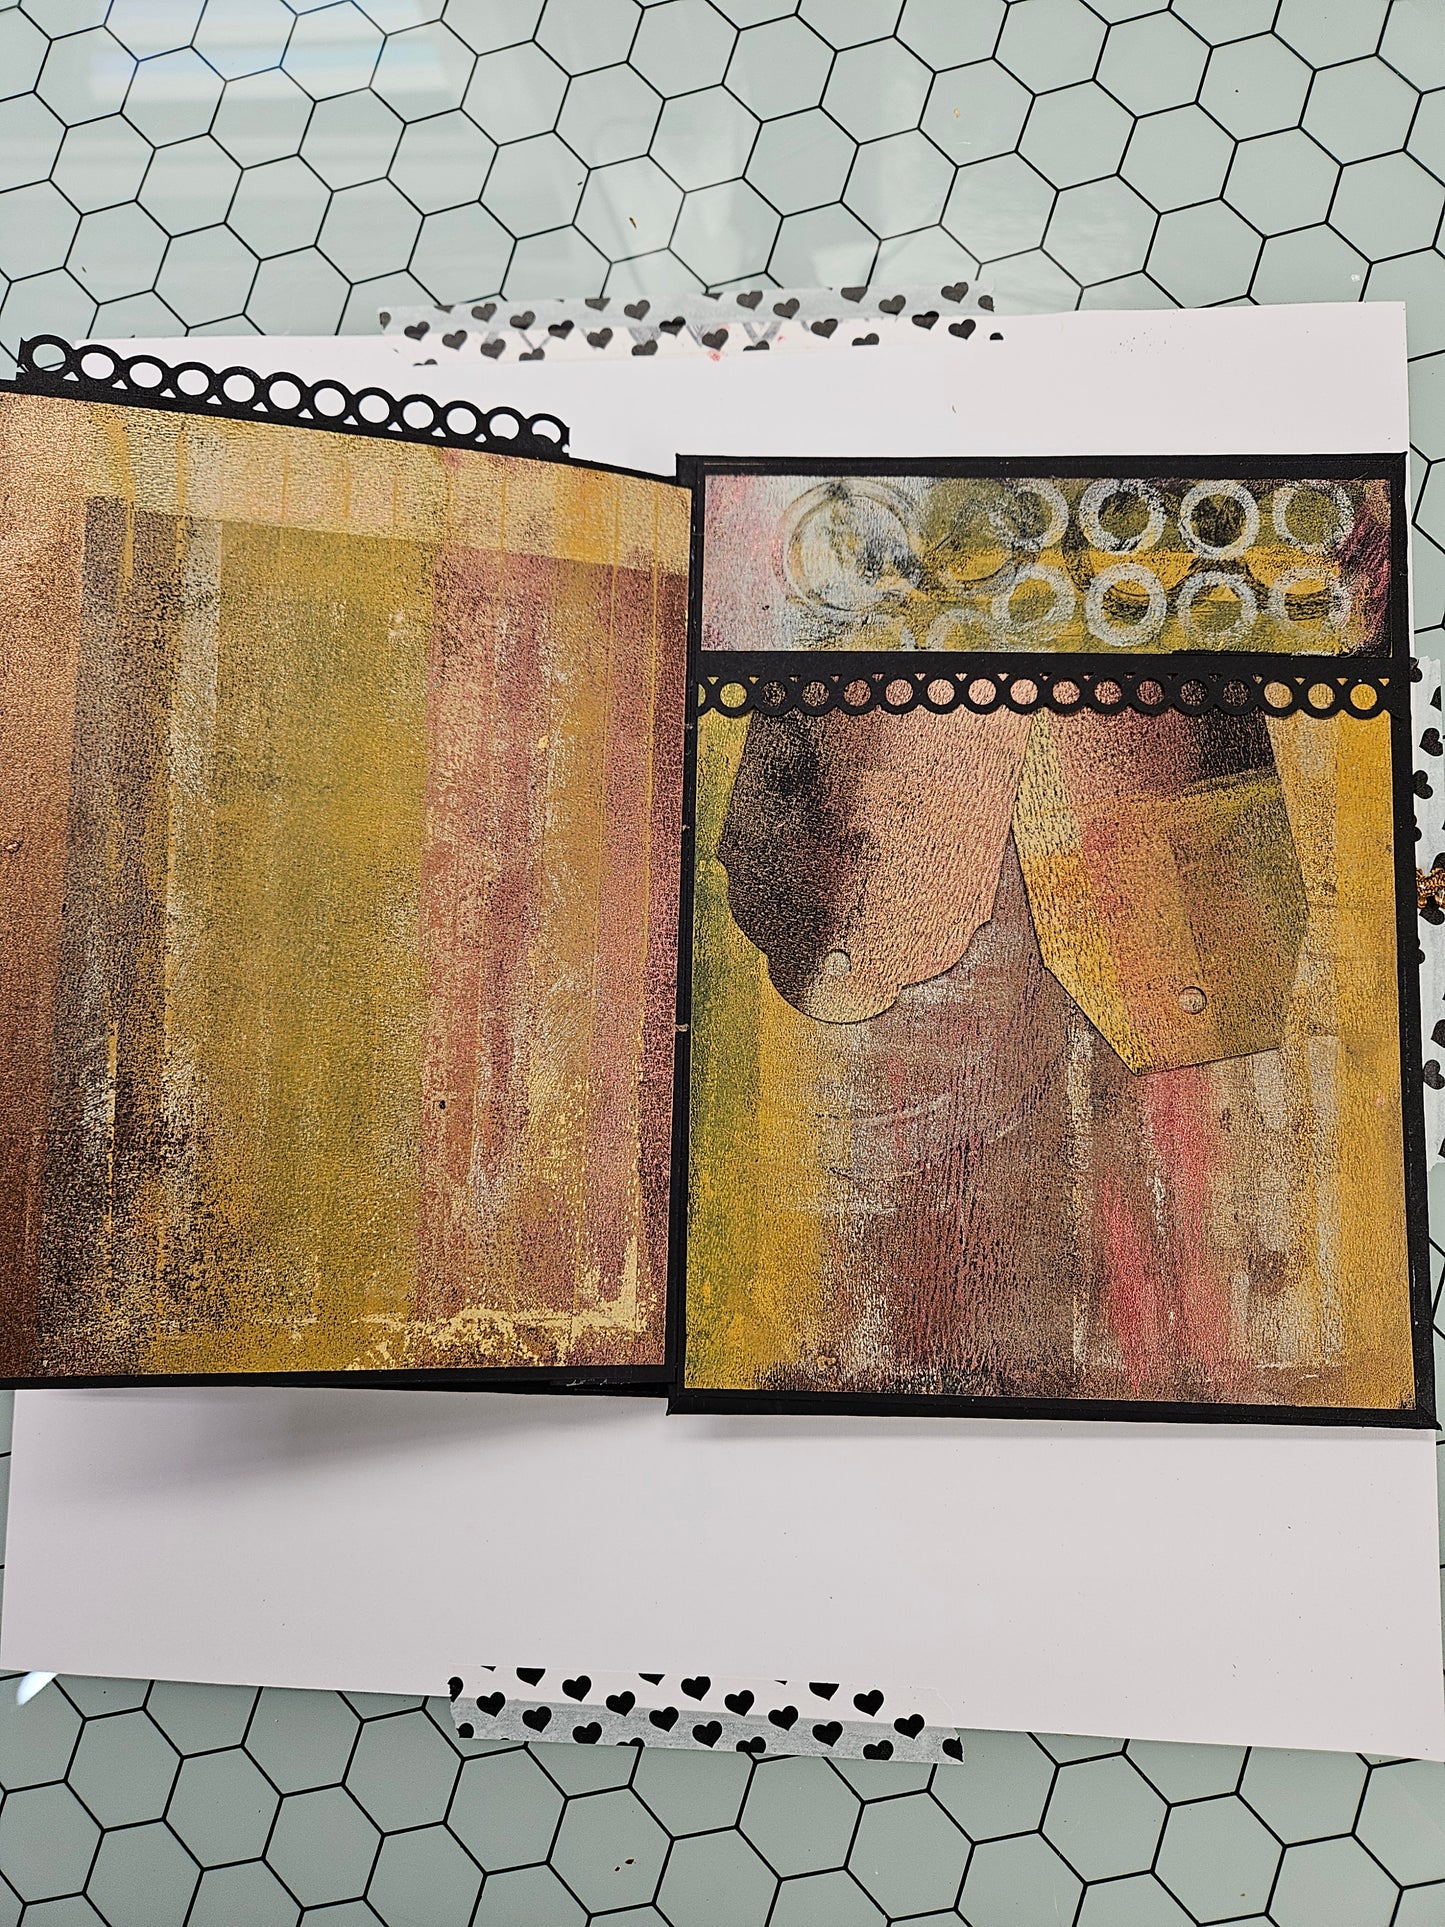 Hand-Painted Album in Shades of Brown. Gold, Rose Gold and Black: 6"x8": Multi-Media Painted Pages, Accordion Binding, Tie Closure